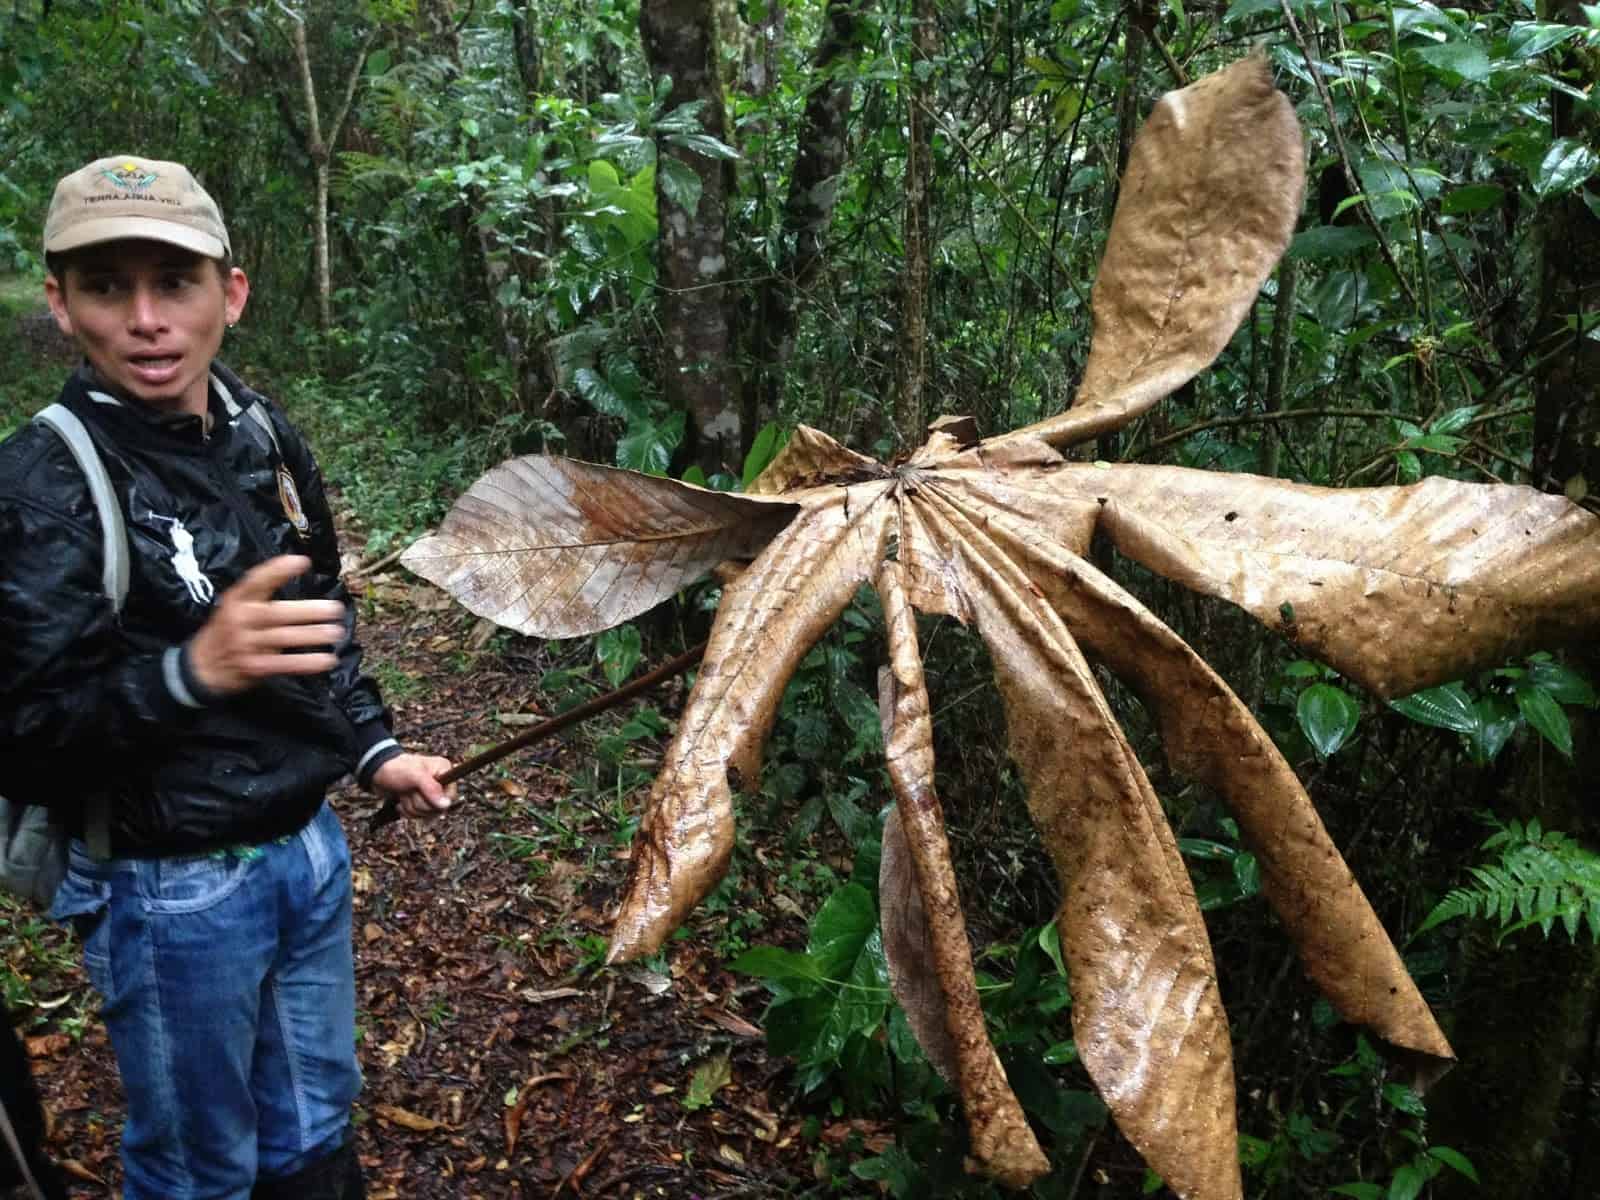 Our guide showing us an interesting leaf in Parque Nacional Natural Tatamá in Colombia